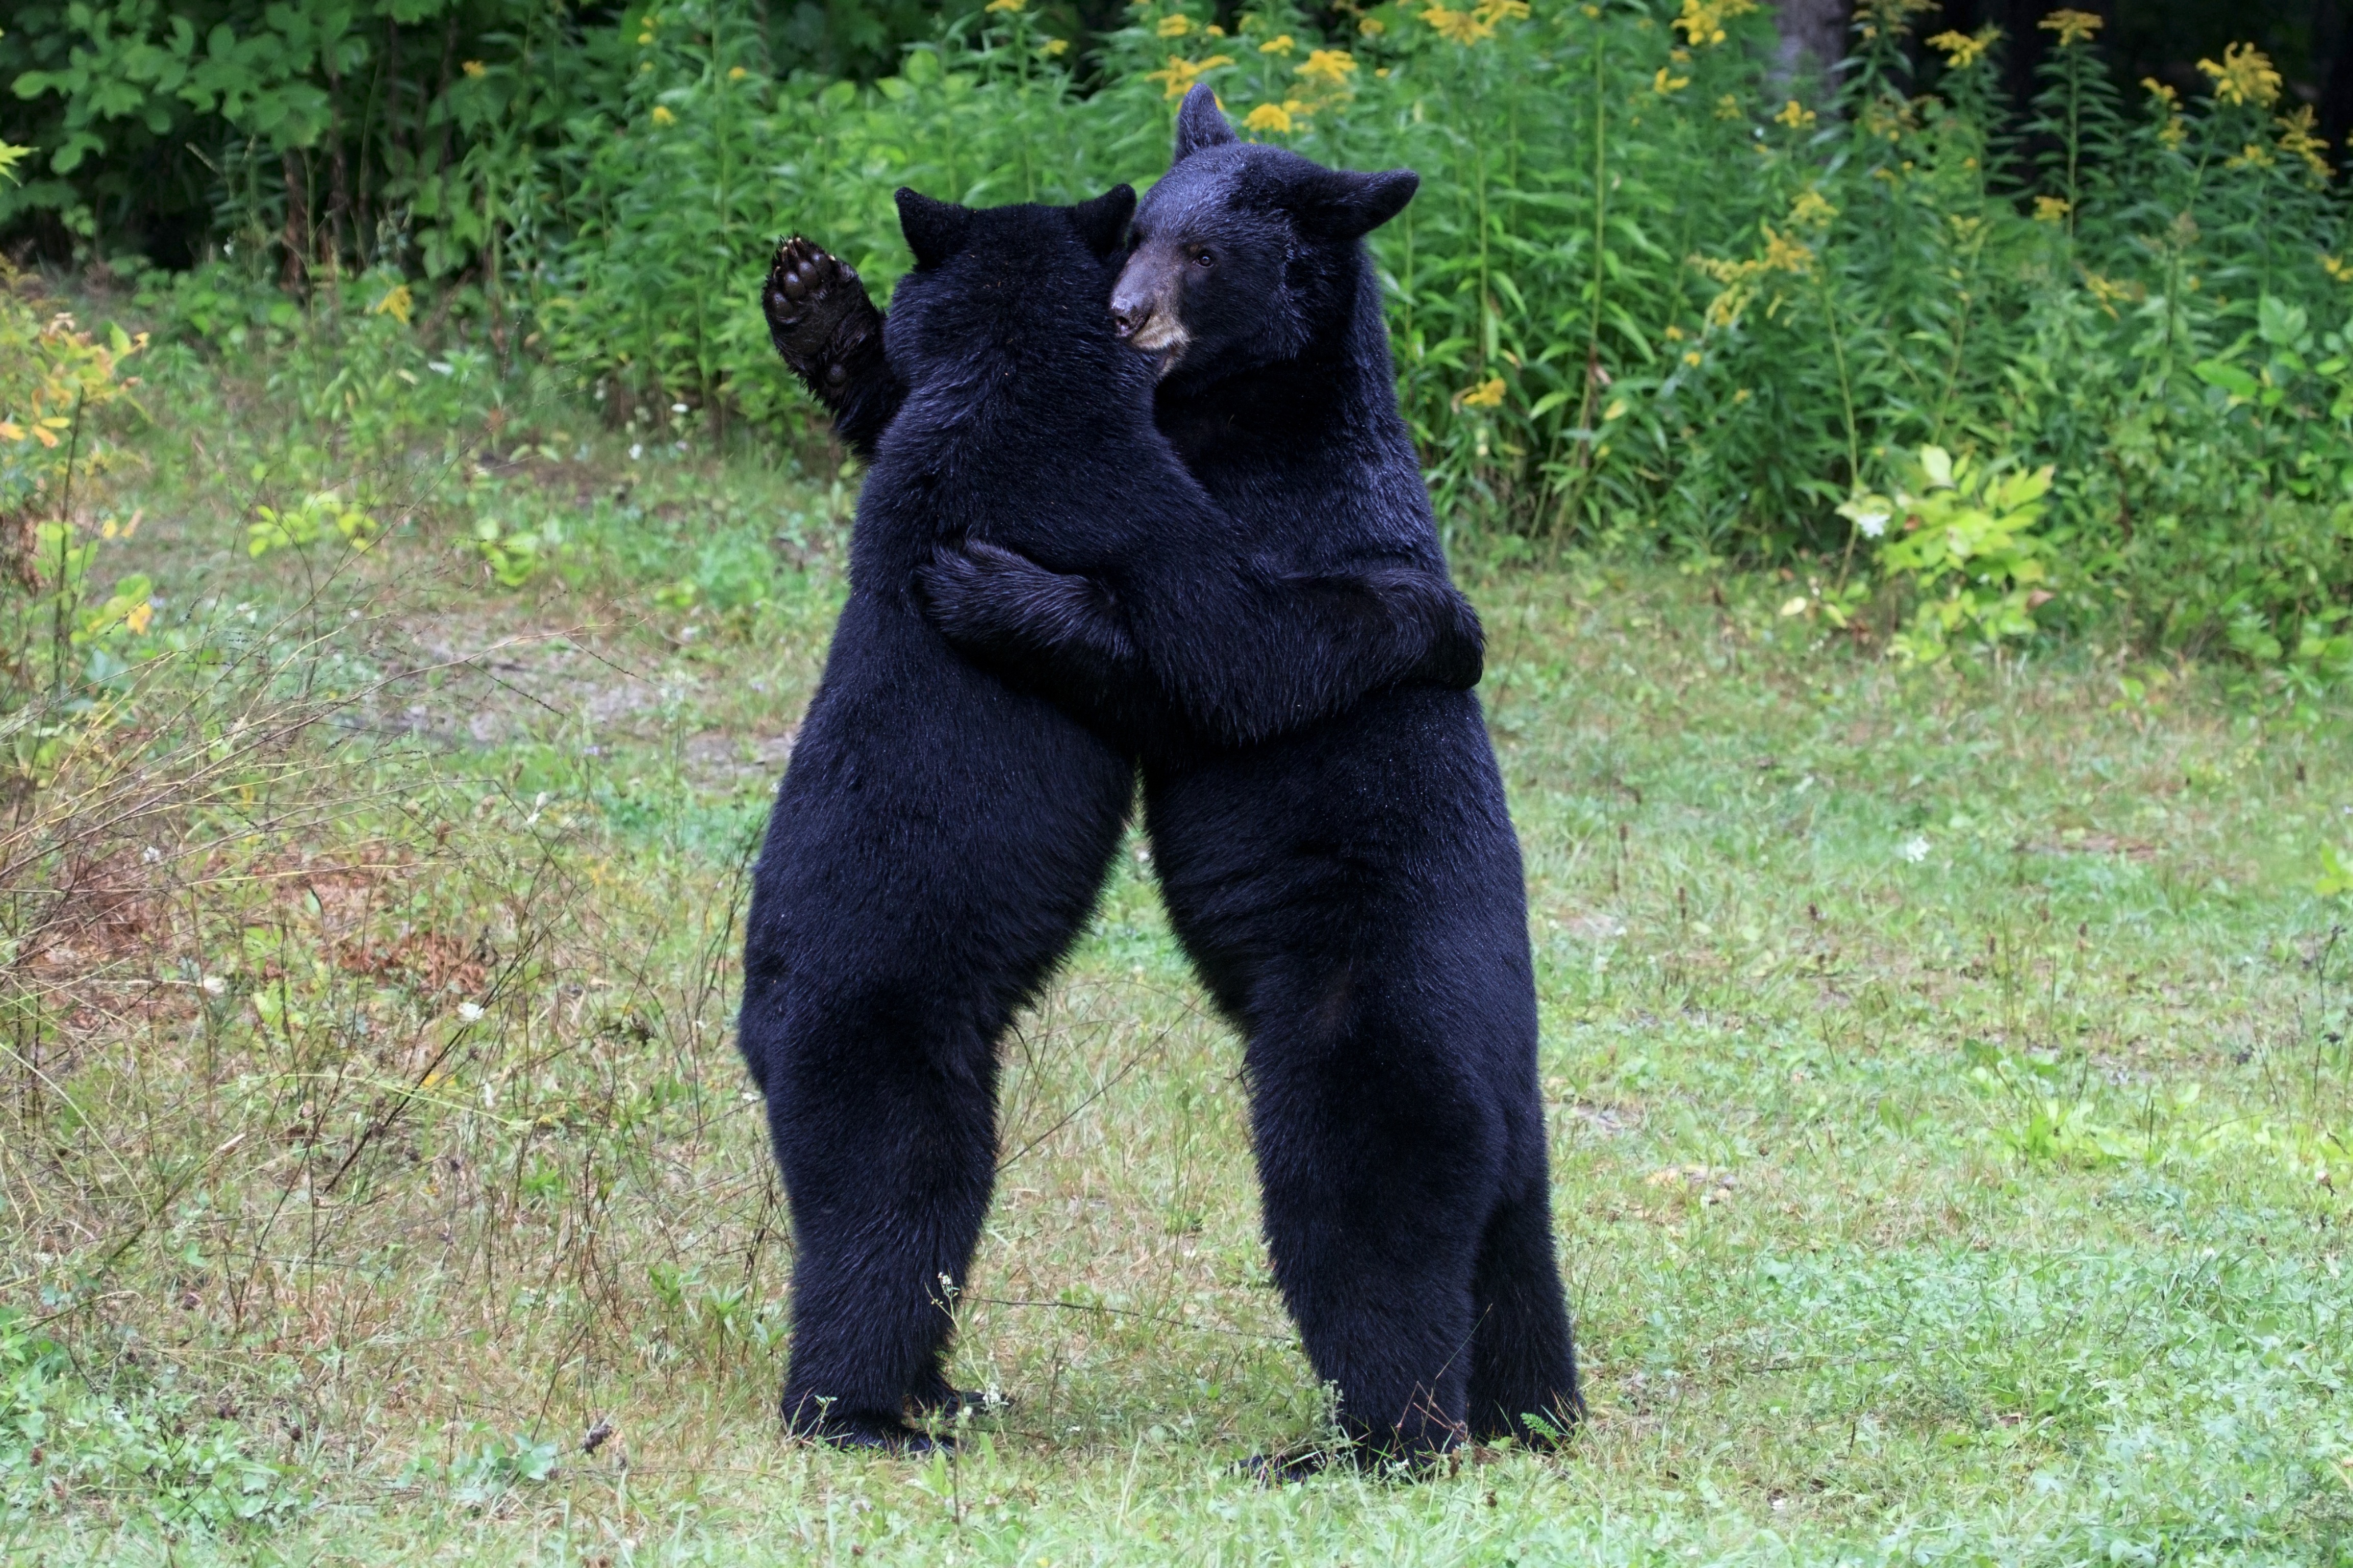 Two black bears are standing up hugging each other.